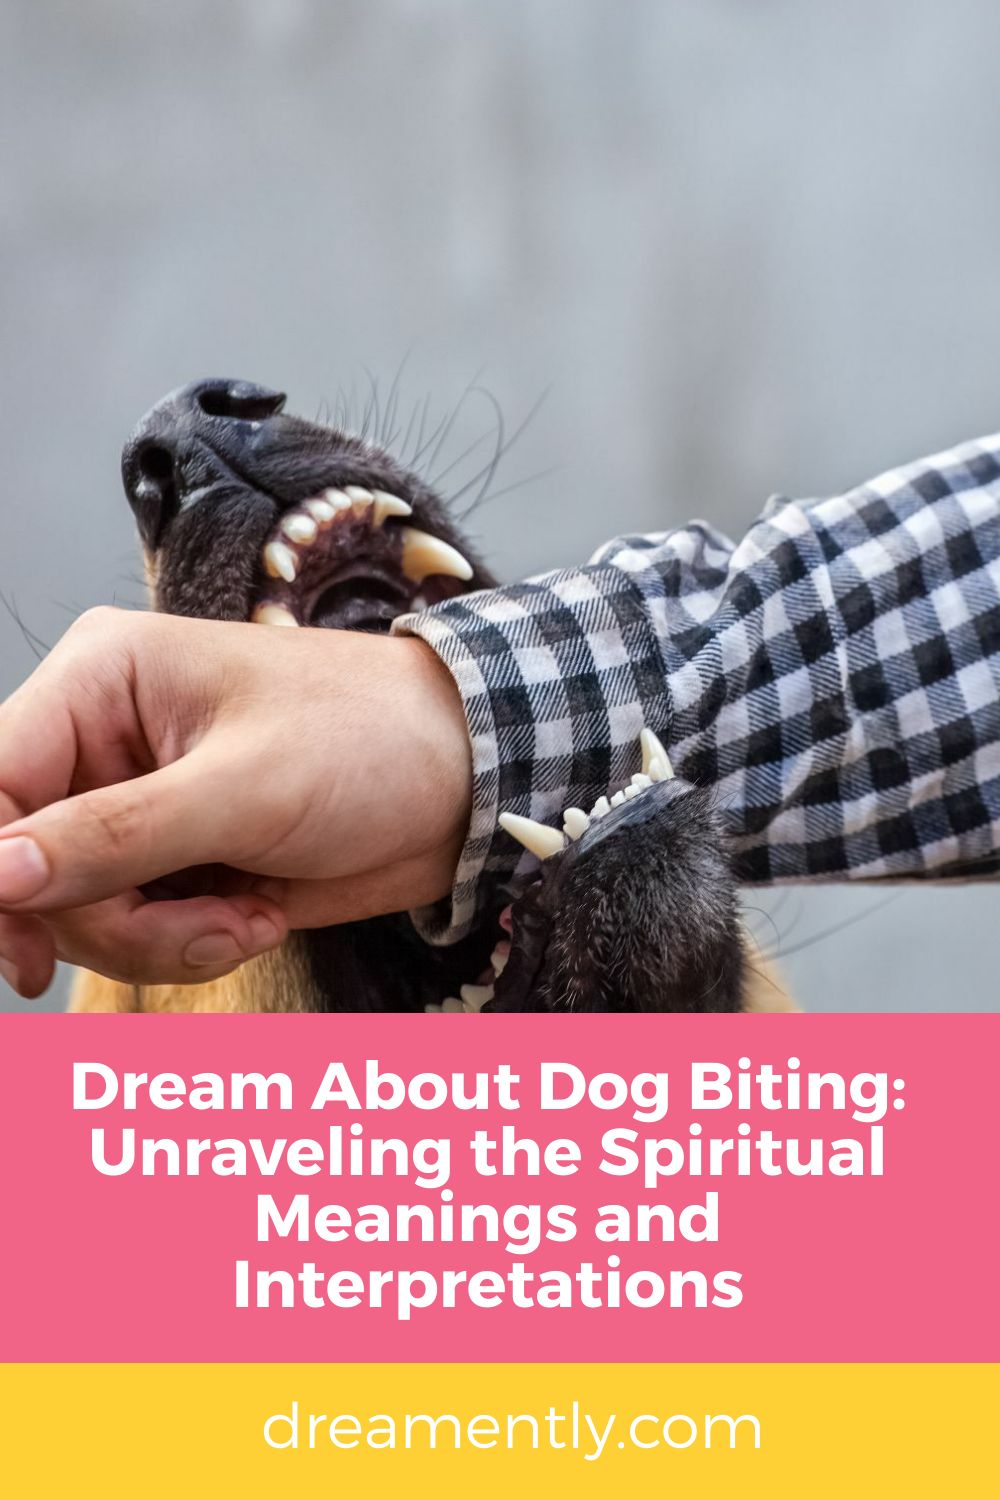 Dream About Dog Biting Unraveling the Spiritual Meanings and Interpretations